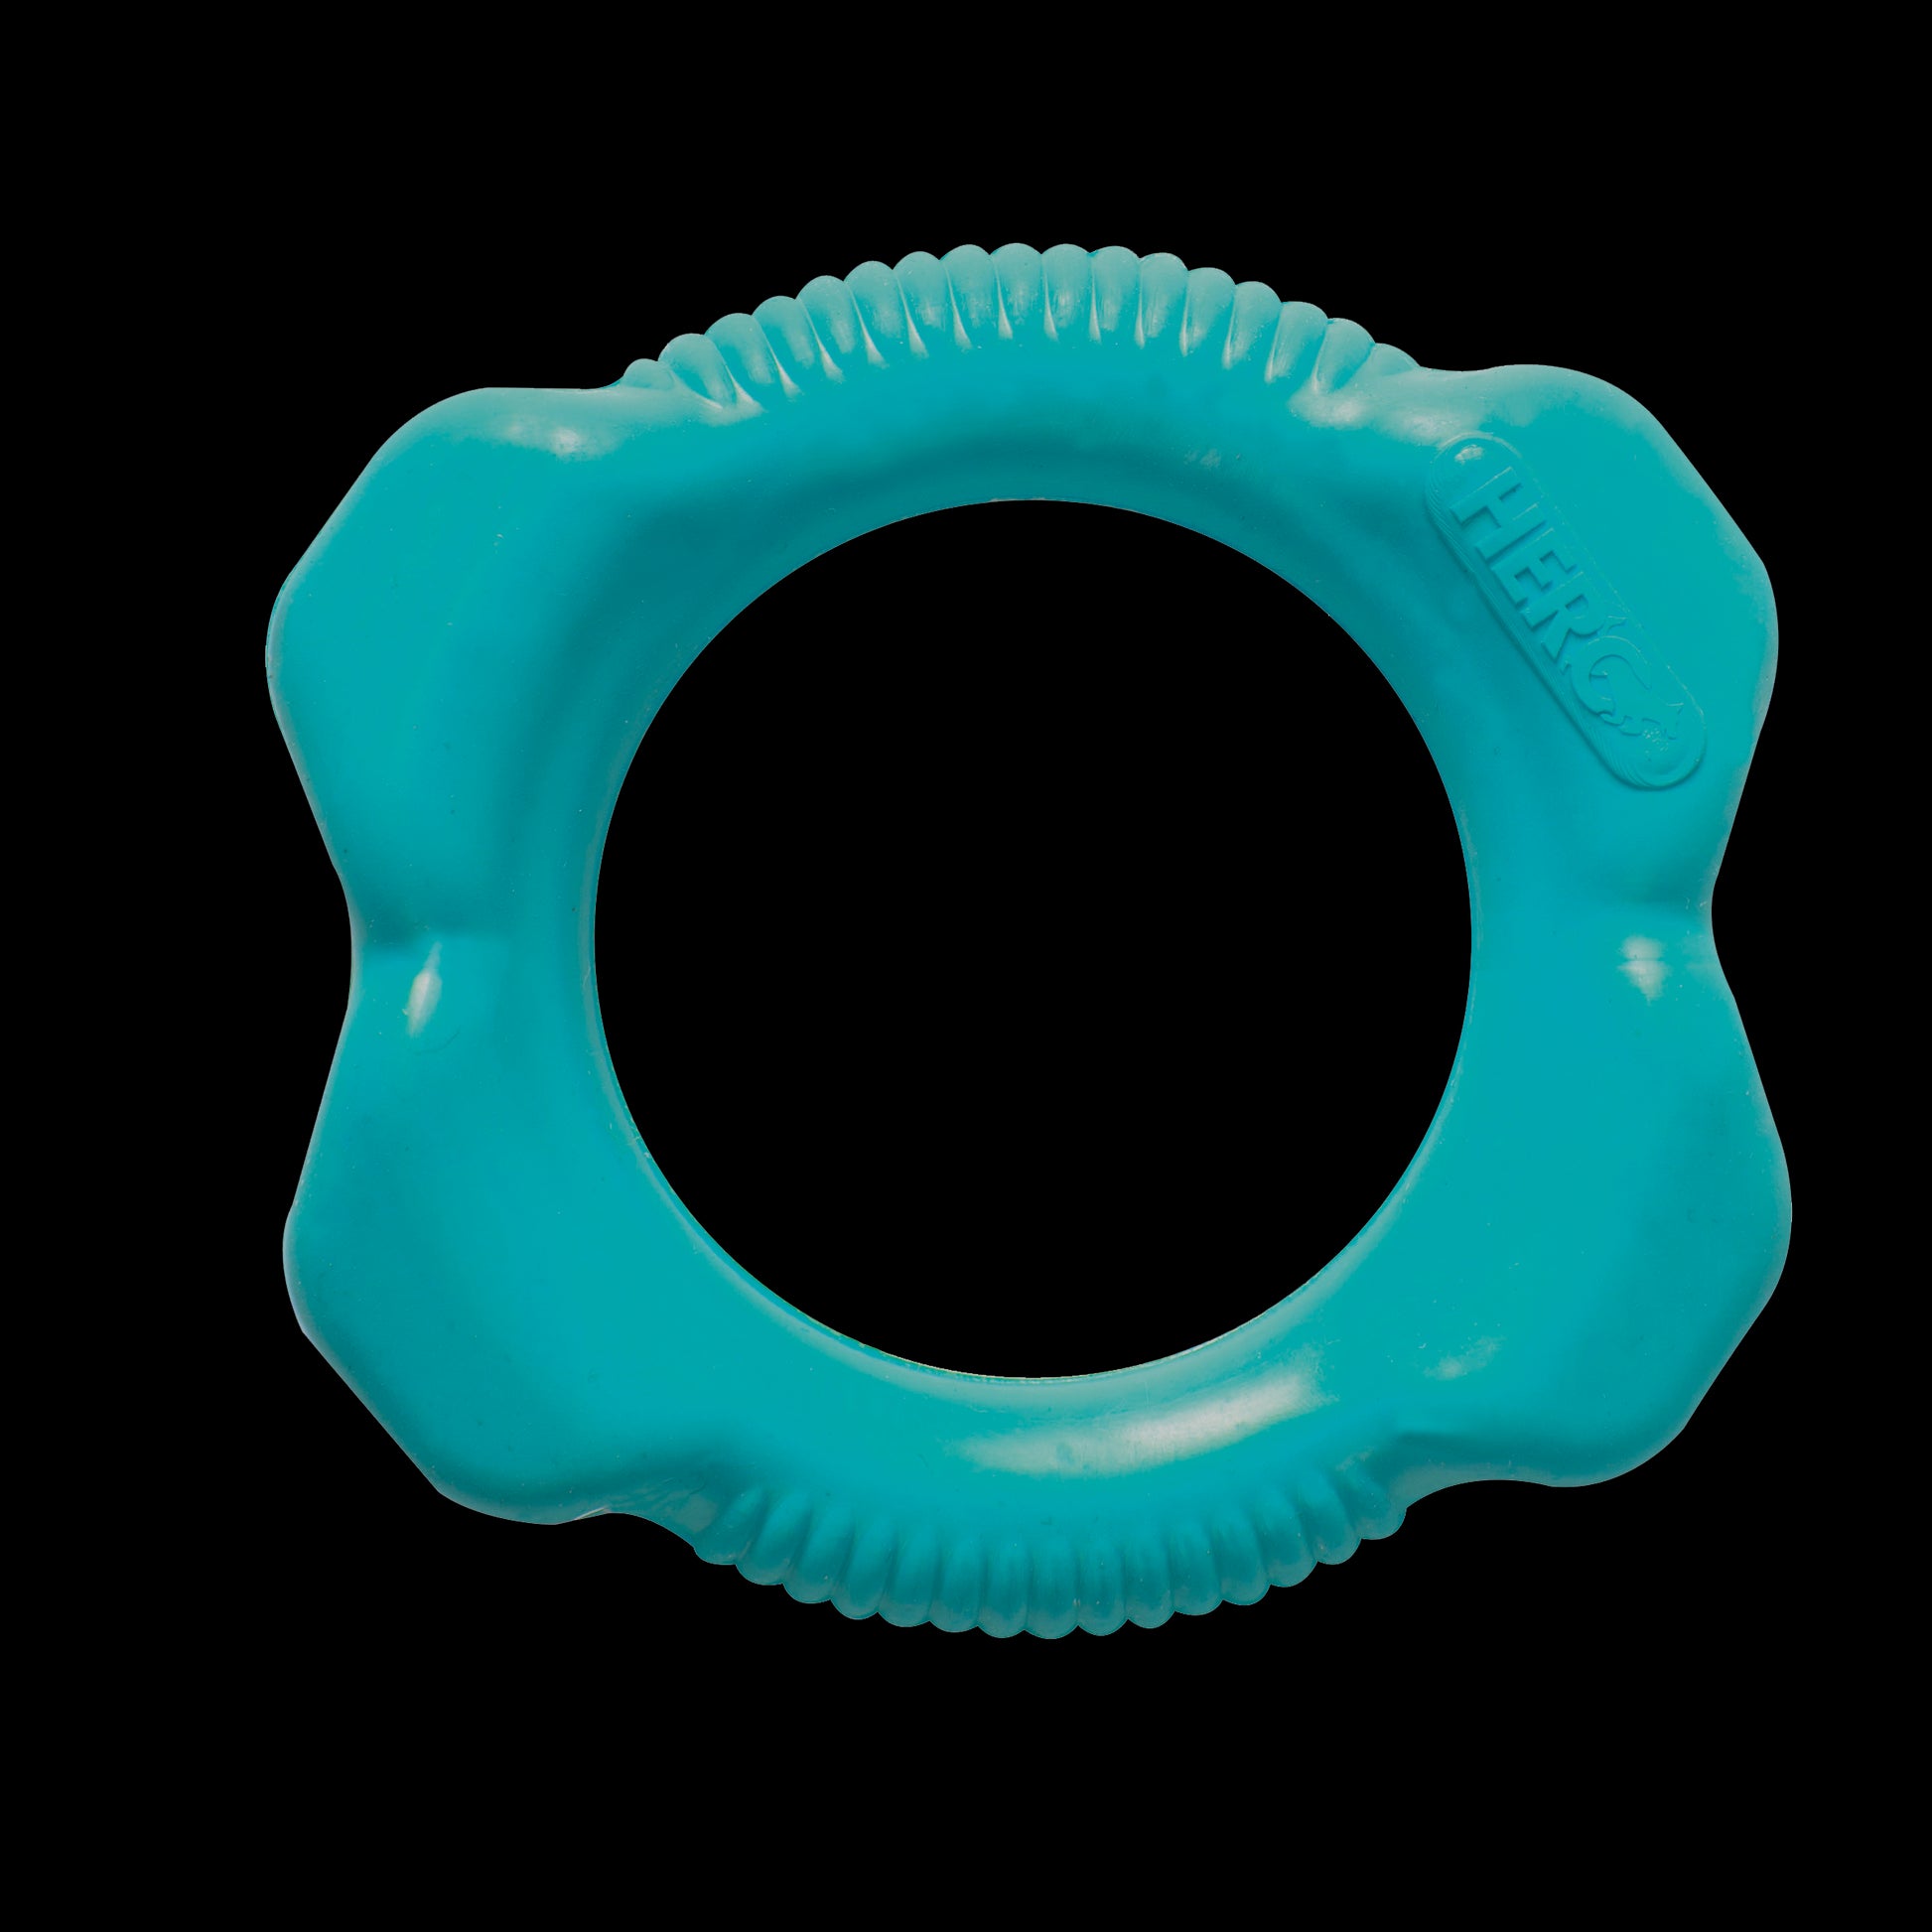 Blue Hero puppy rubber ring toy